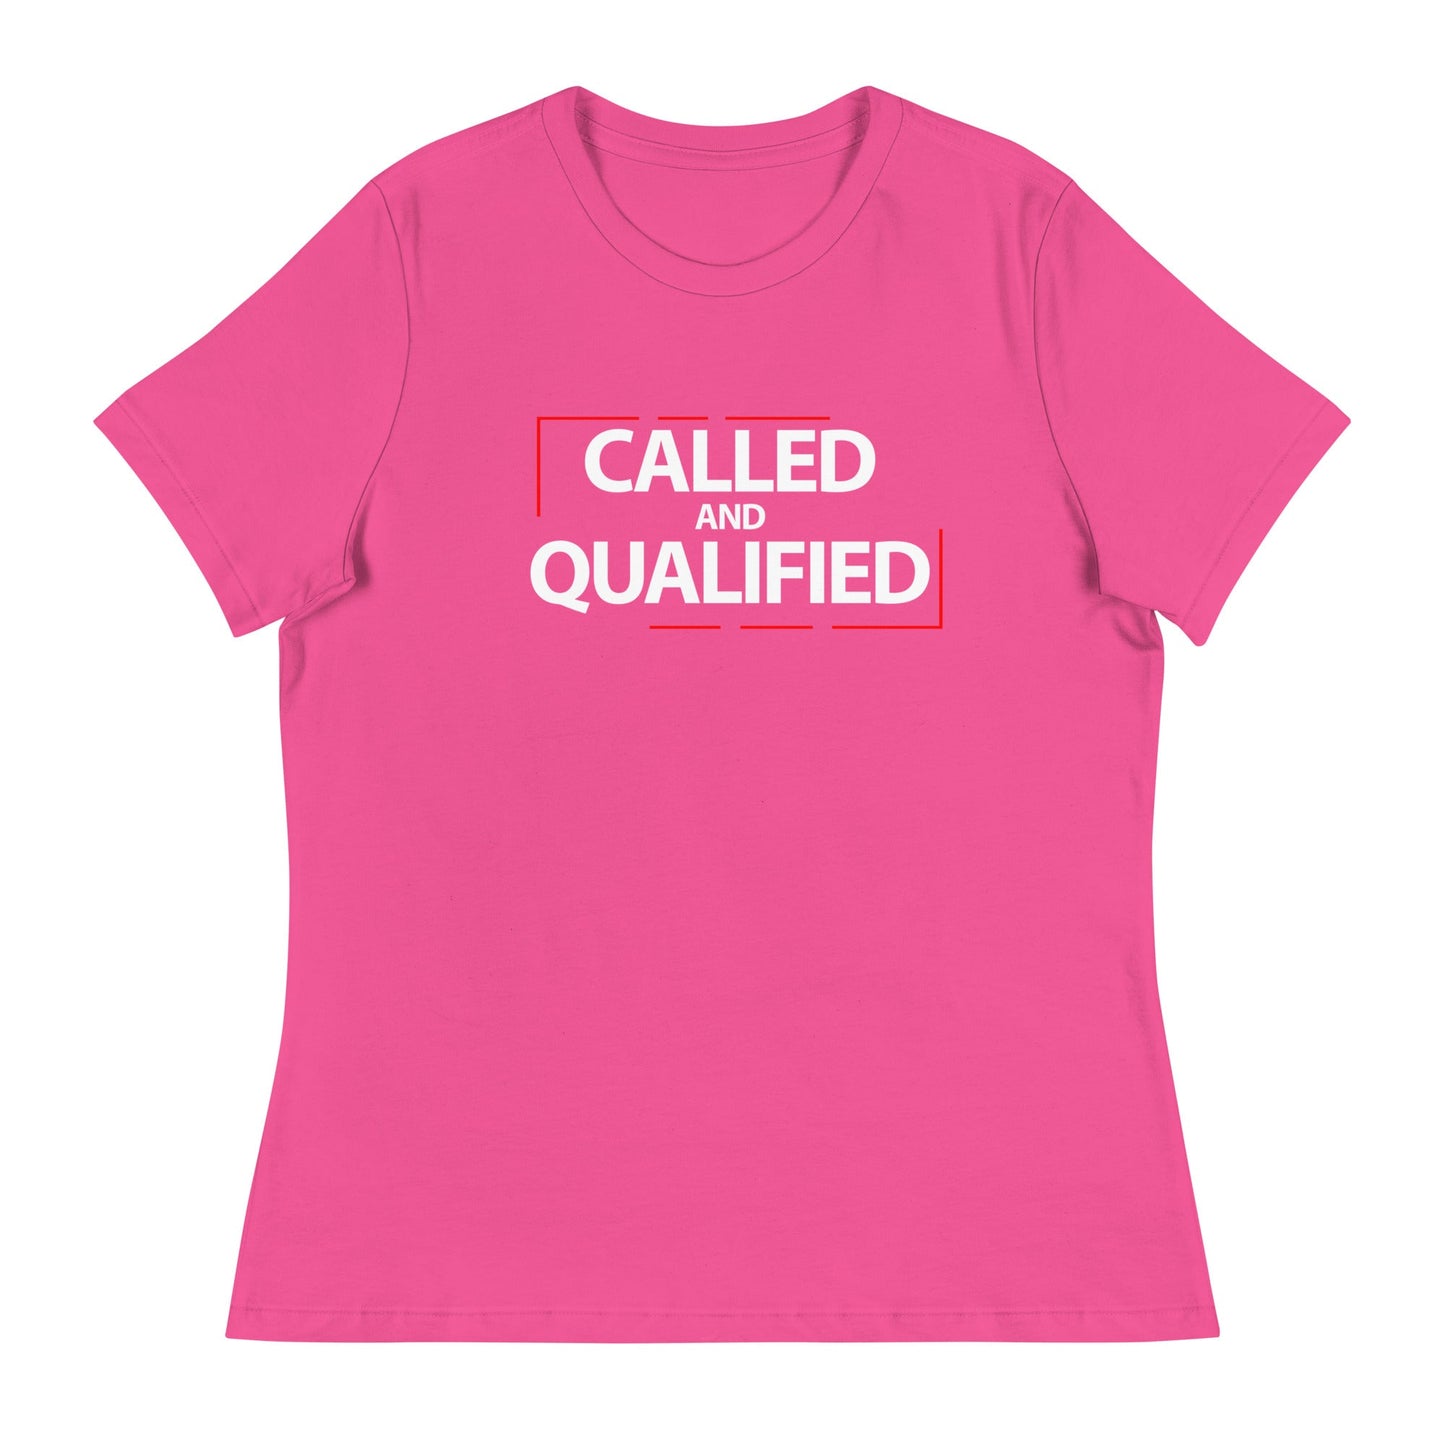 Called & Qualified Women's T-Shirt